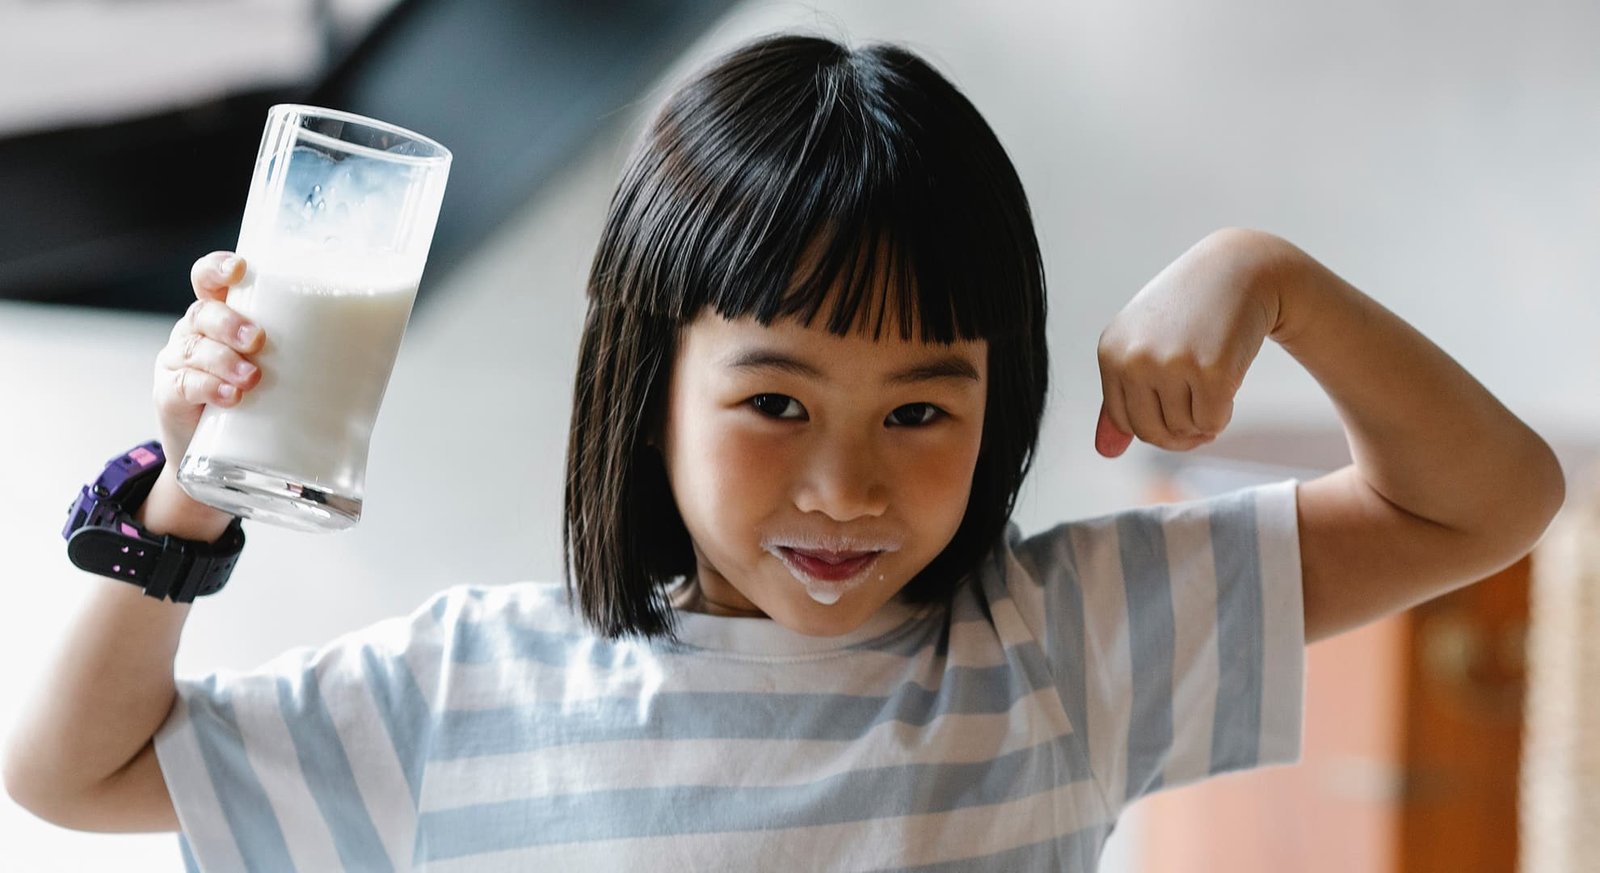 whole-fat-milk-as-good-for-kids-as-low-fat-study